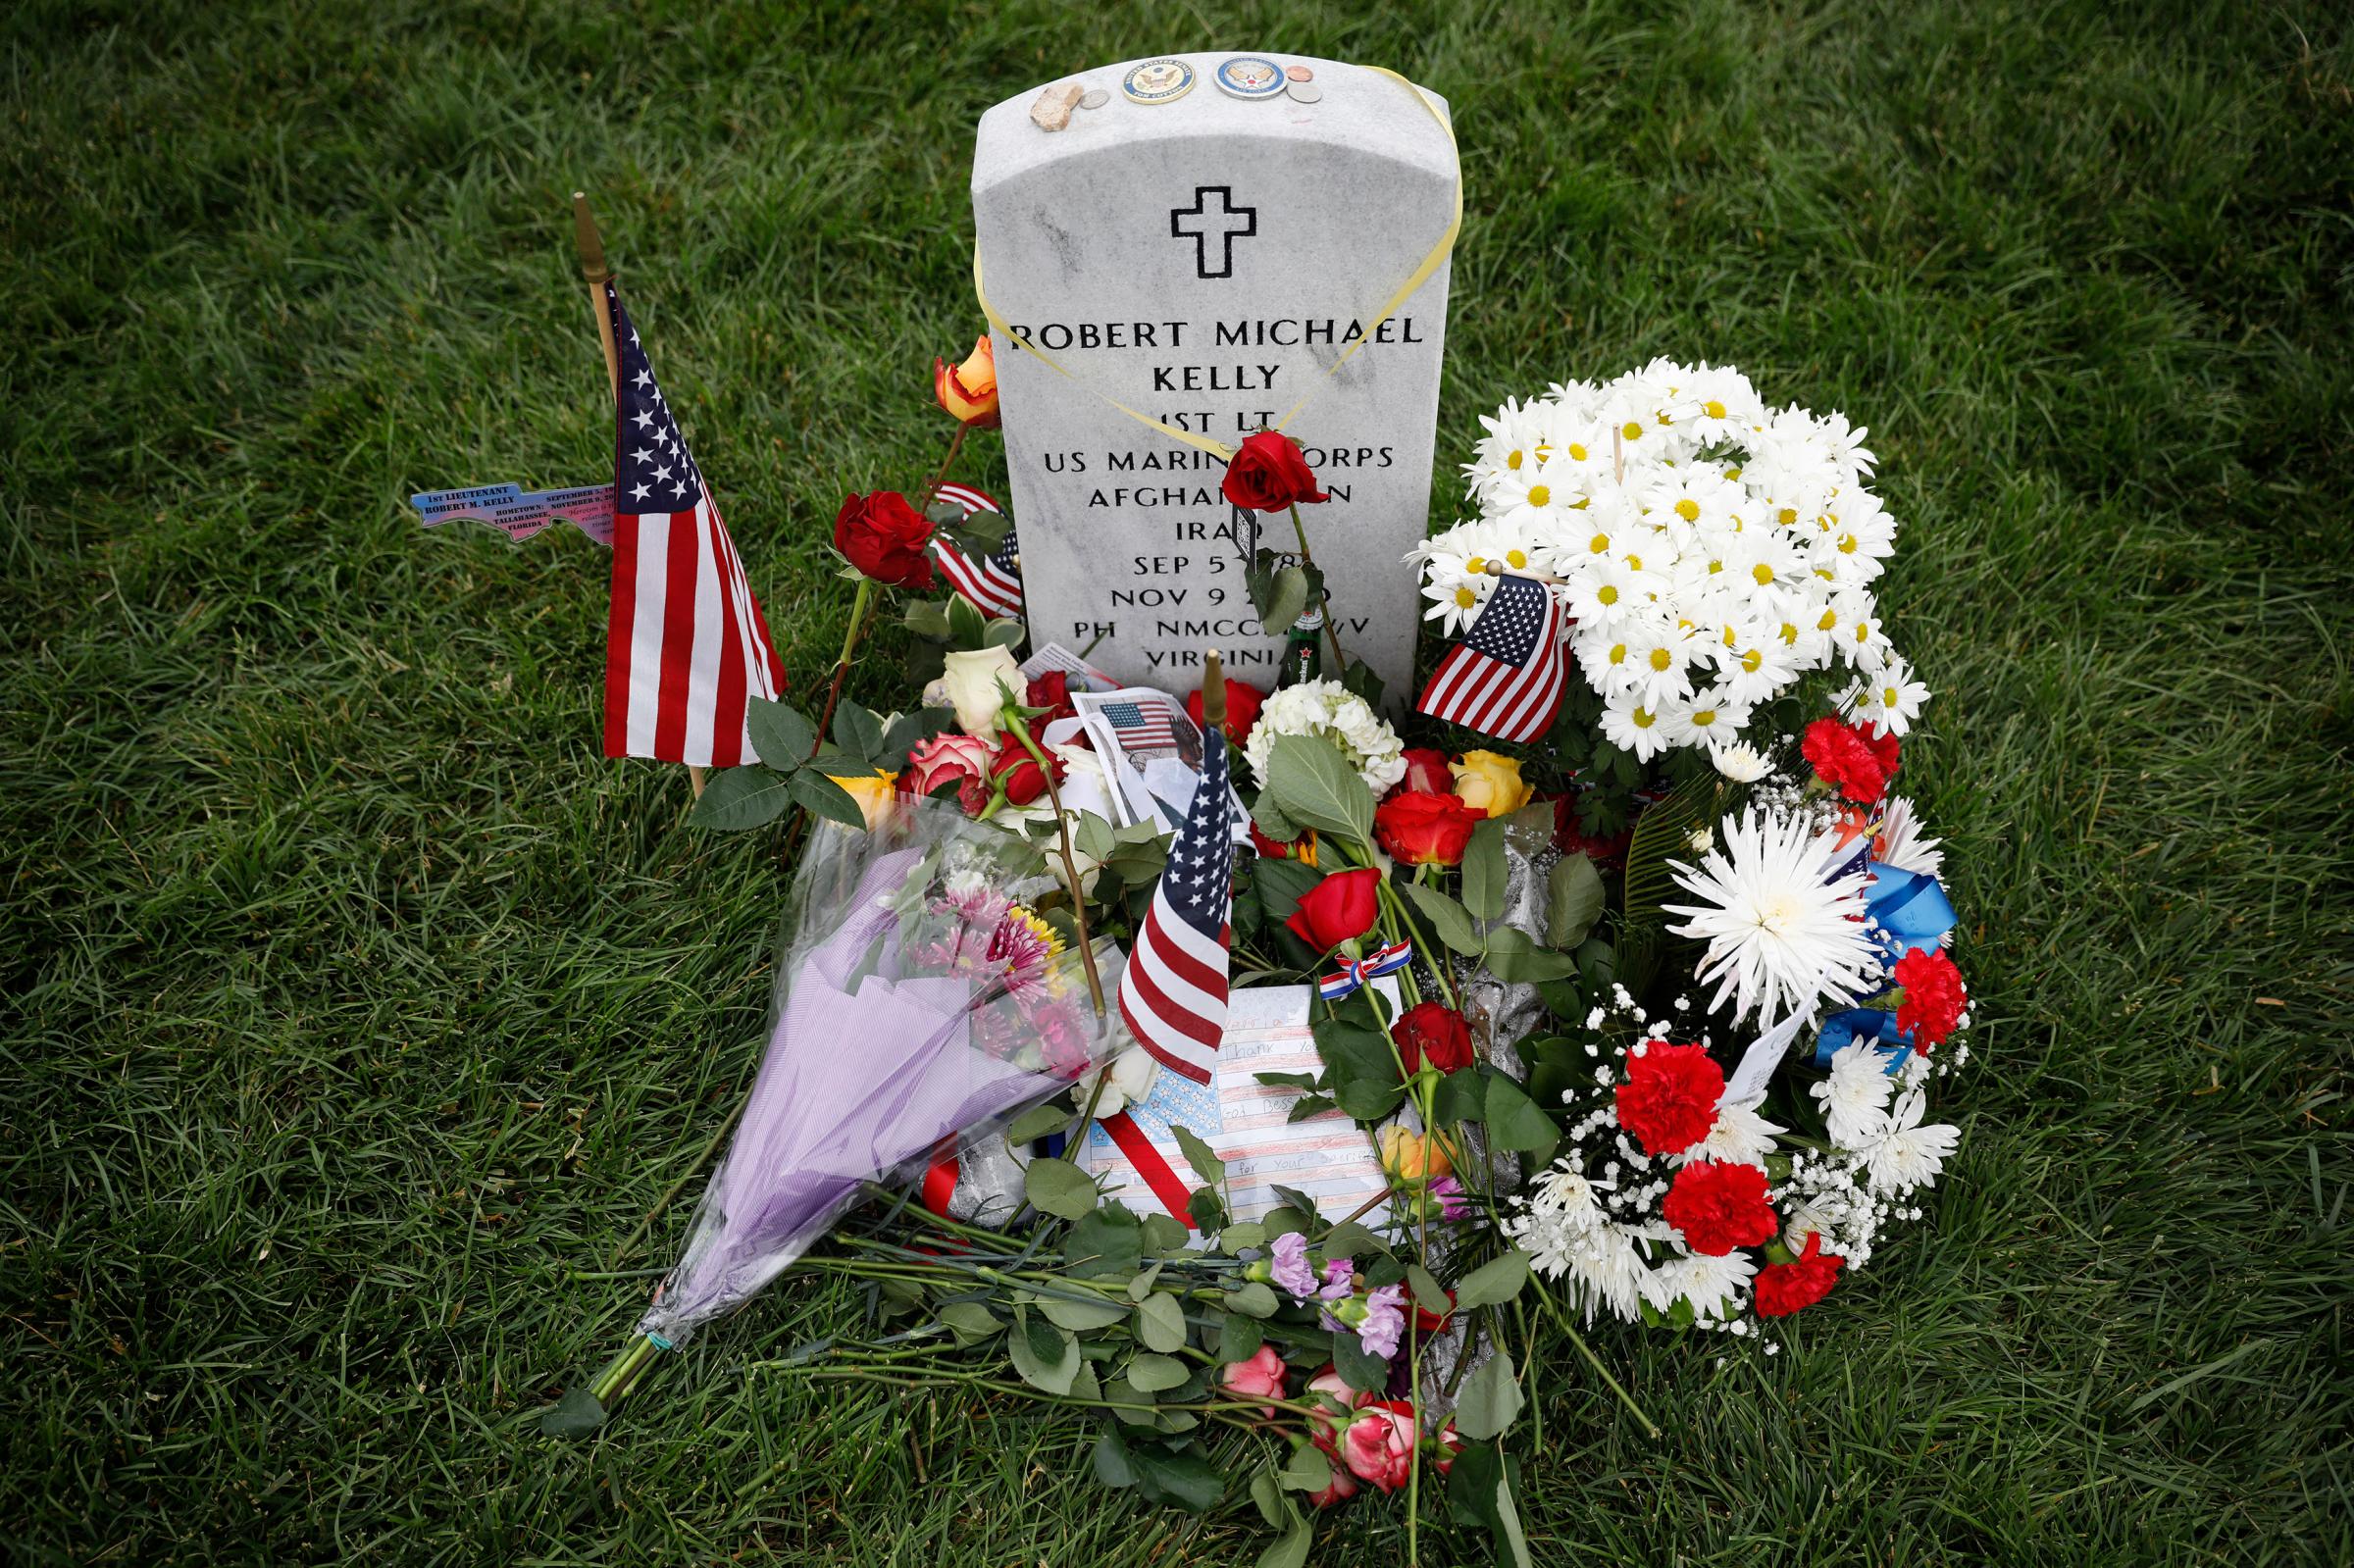 Memorial Day Visitors Pay Their Respects To The Fallen At Arlington Nat'l Cemetery